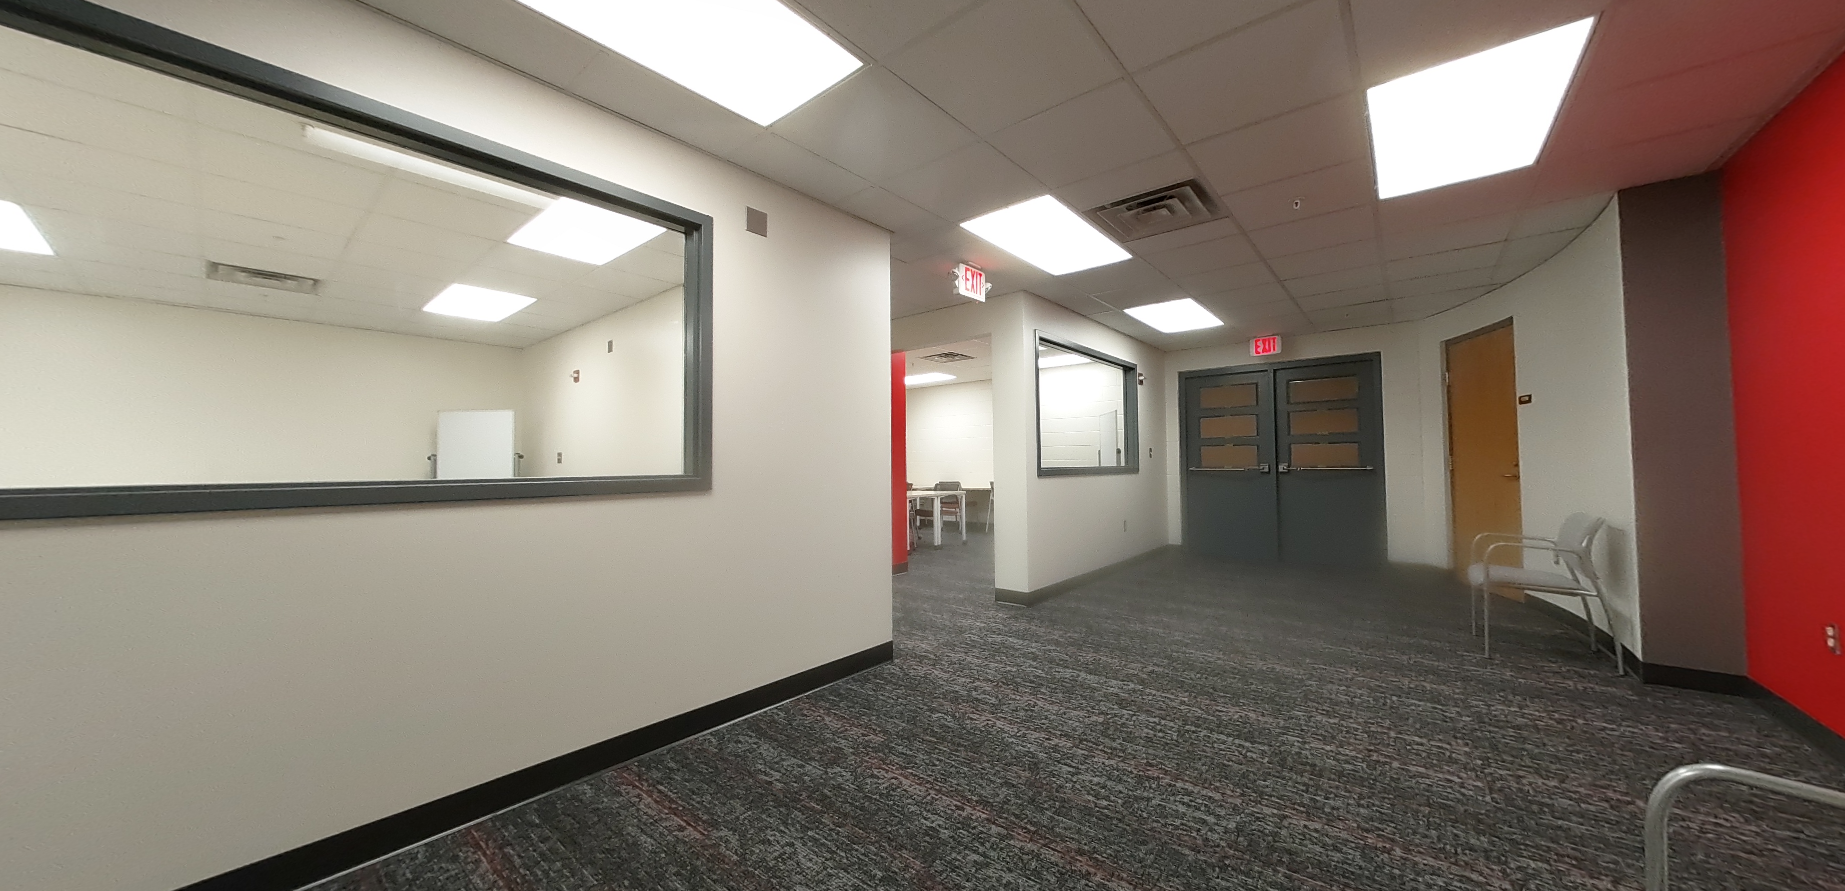 "After" photo of east entrance. Red accent wall, bright lighting, open space in hallway. "Windows" into well lit, inviting study rooms.